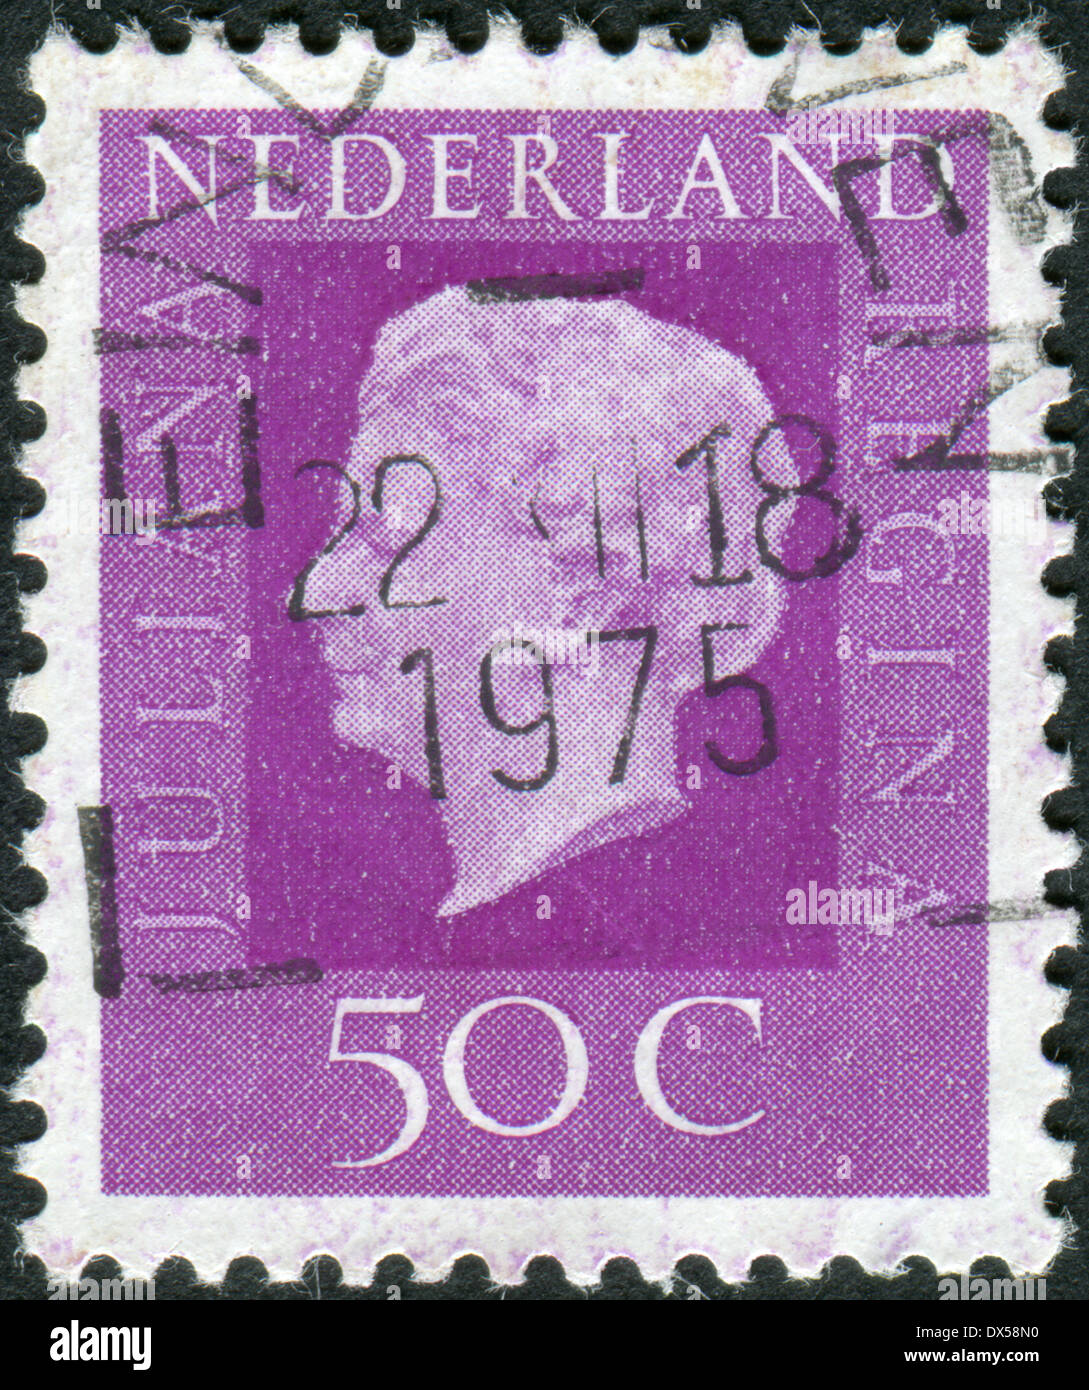 NETHERLANDS - CIRCA 1972: Postage stamp printed in the Netherlands, shows Queen Juliana, circa 1972 Stock Photo